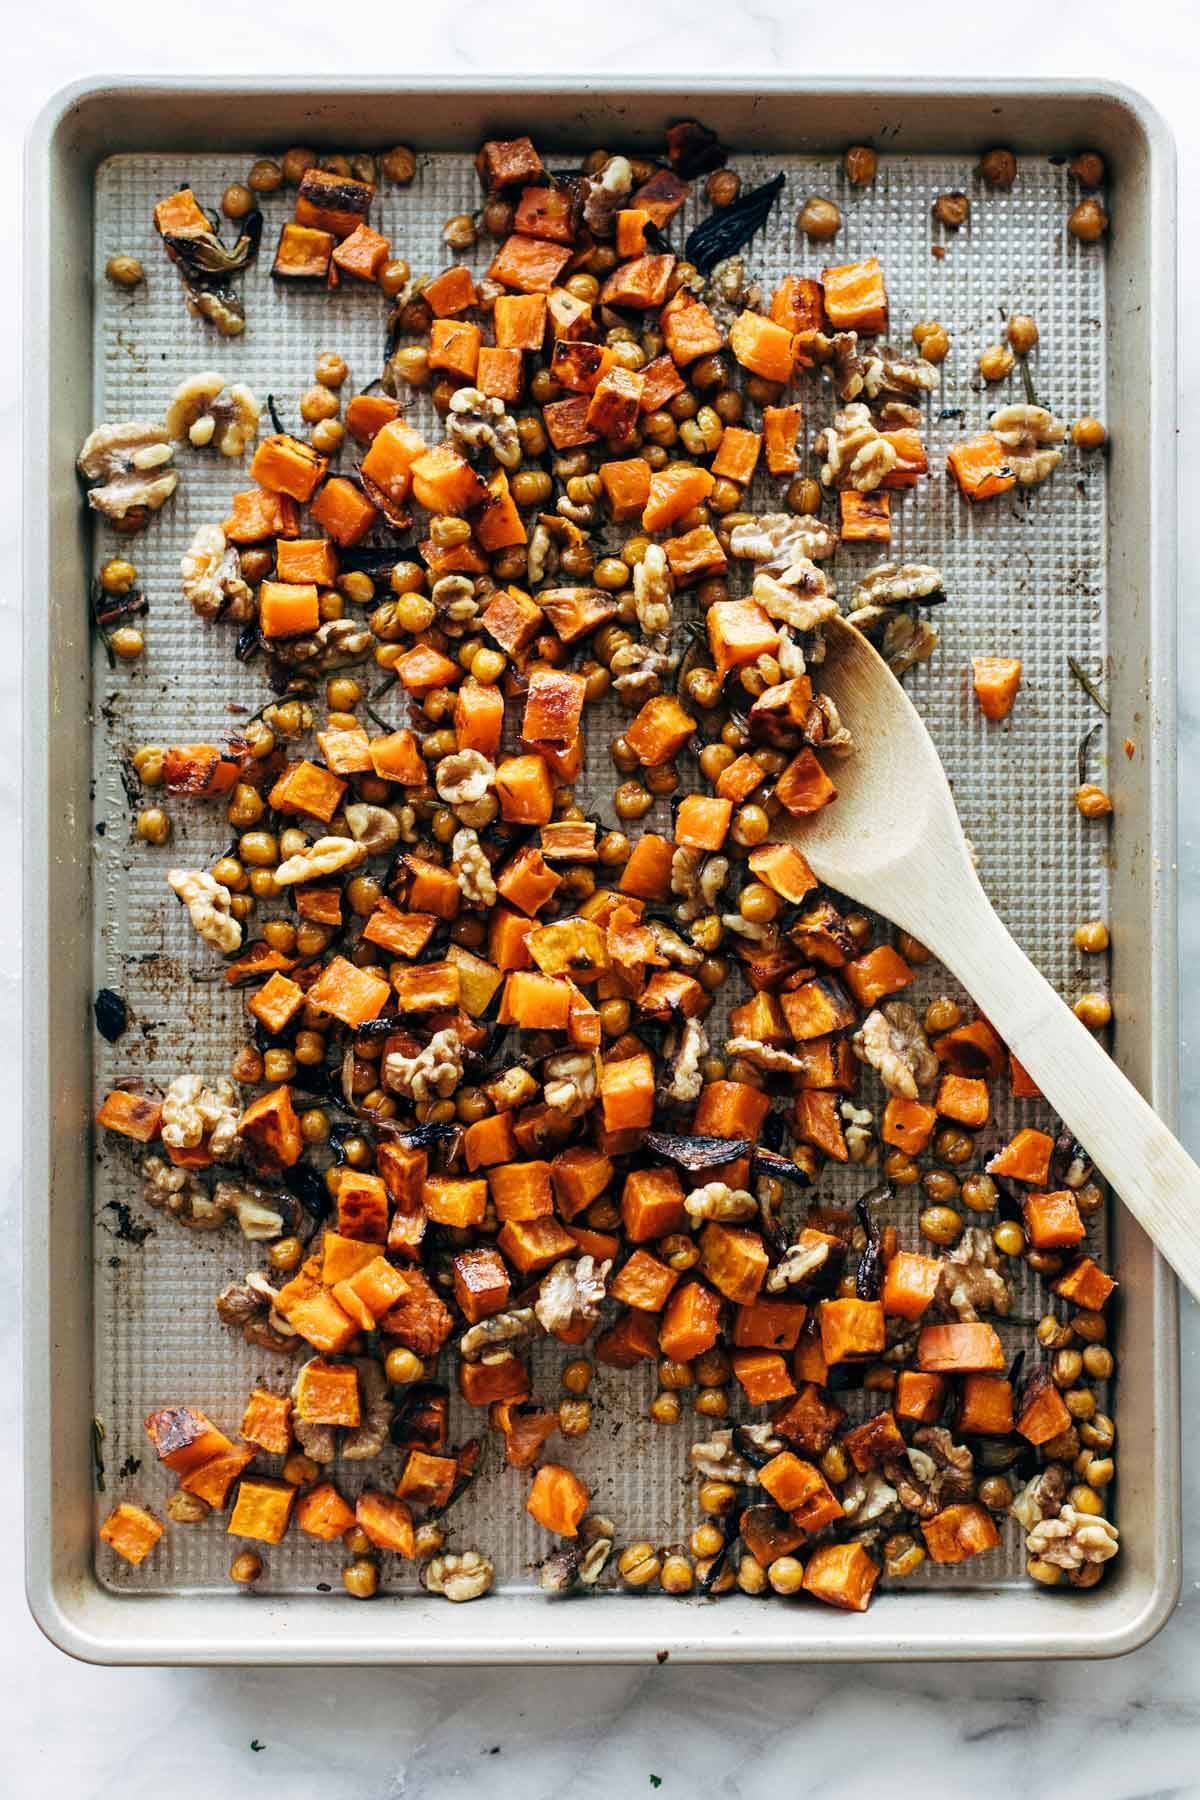 Sweet potatoes, walnuts, and chickpeas on a sheet pan.